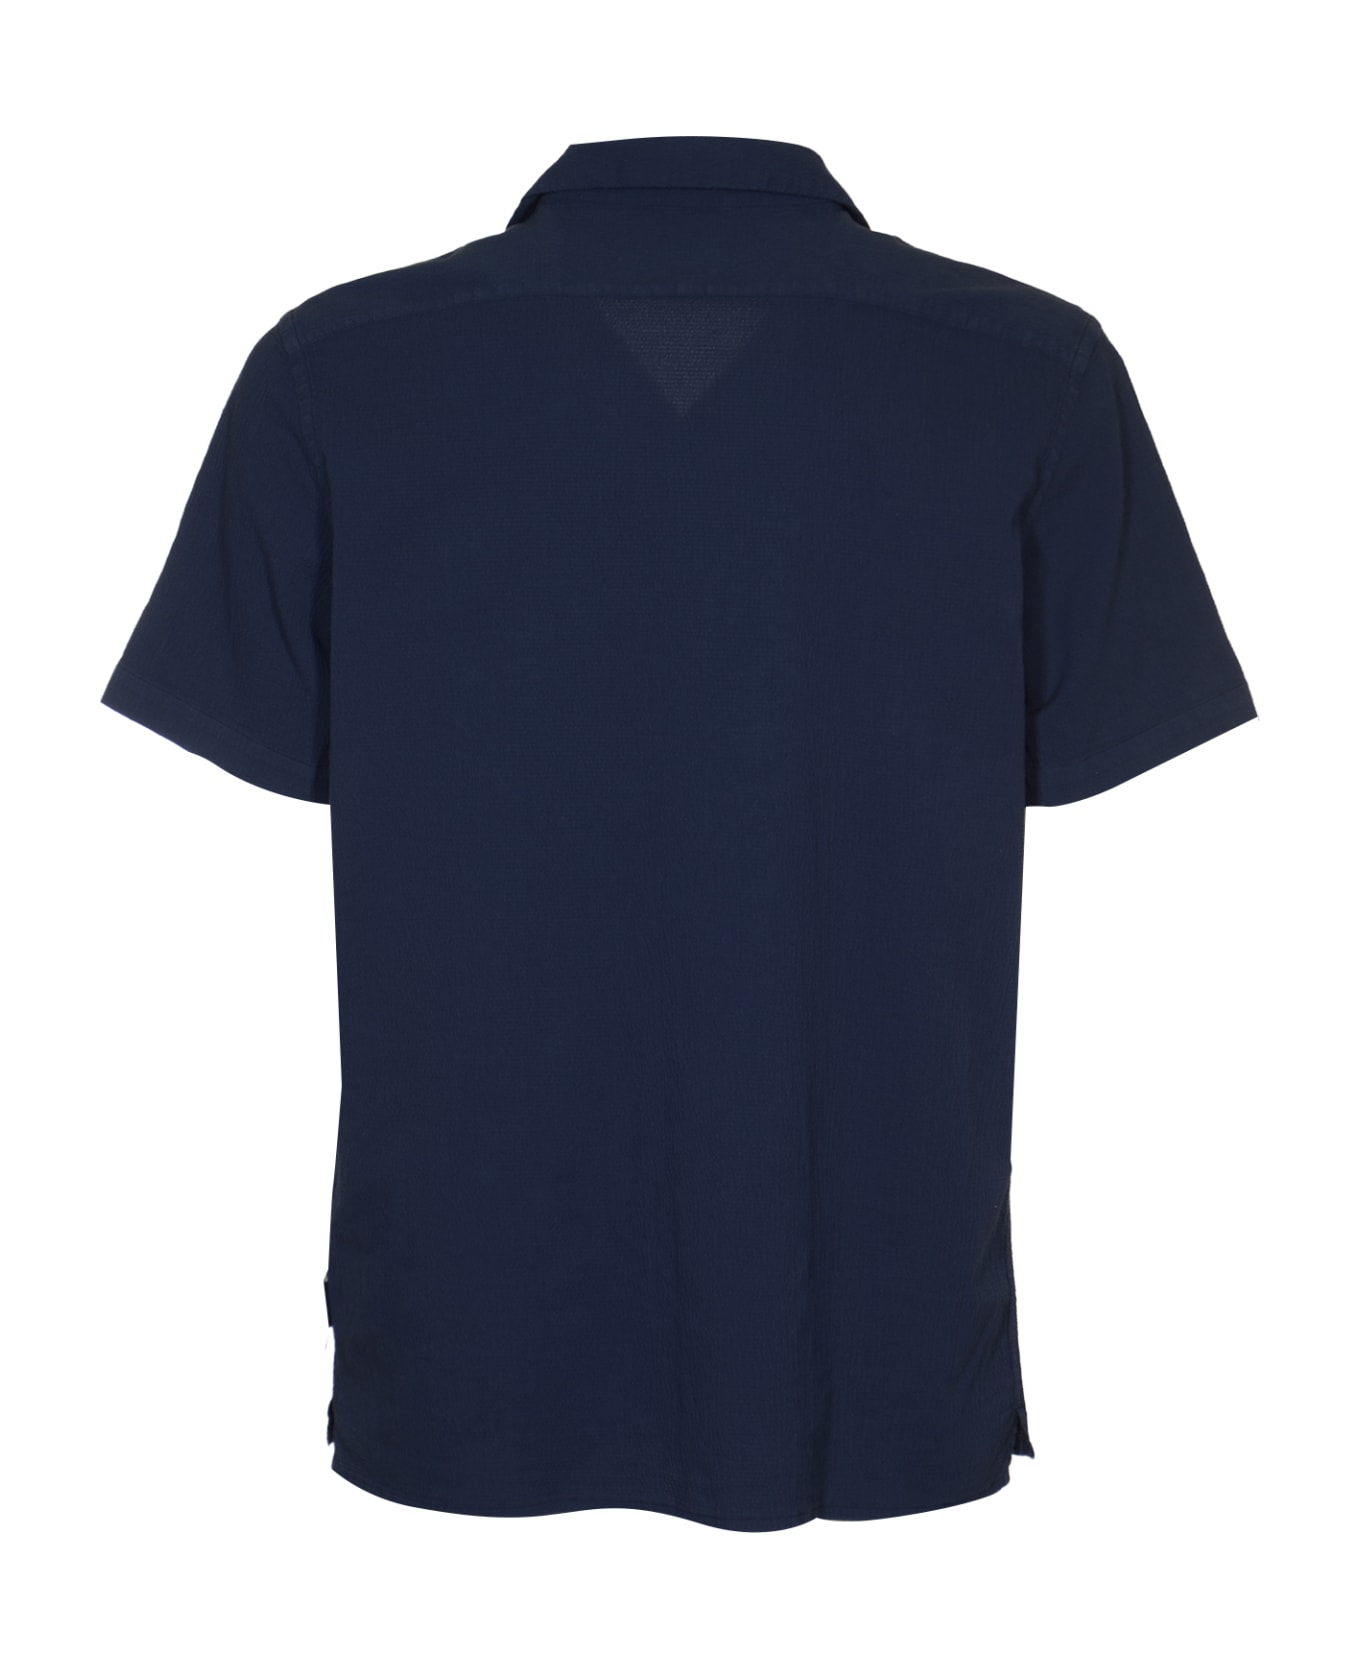 PS by Paul Smith Regular Fit Short-sleeved Shirt - NAVY